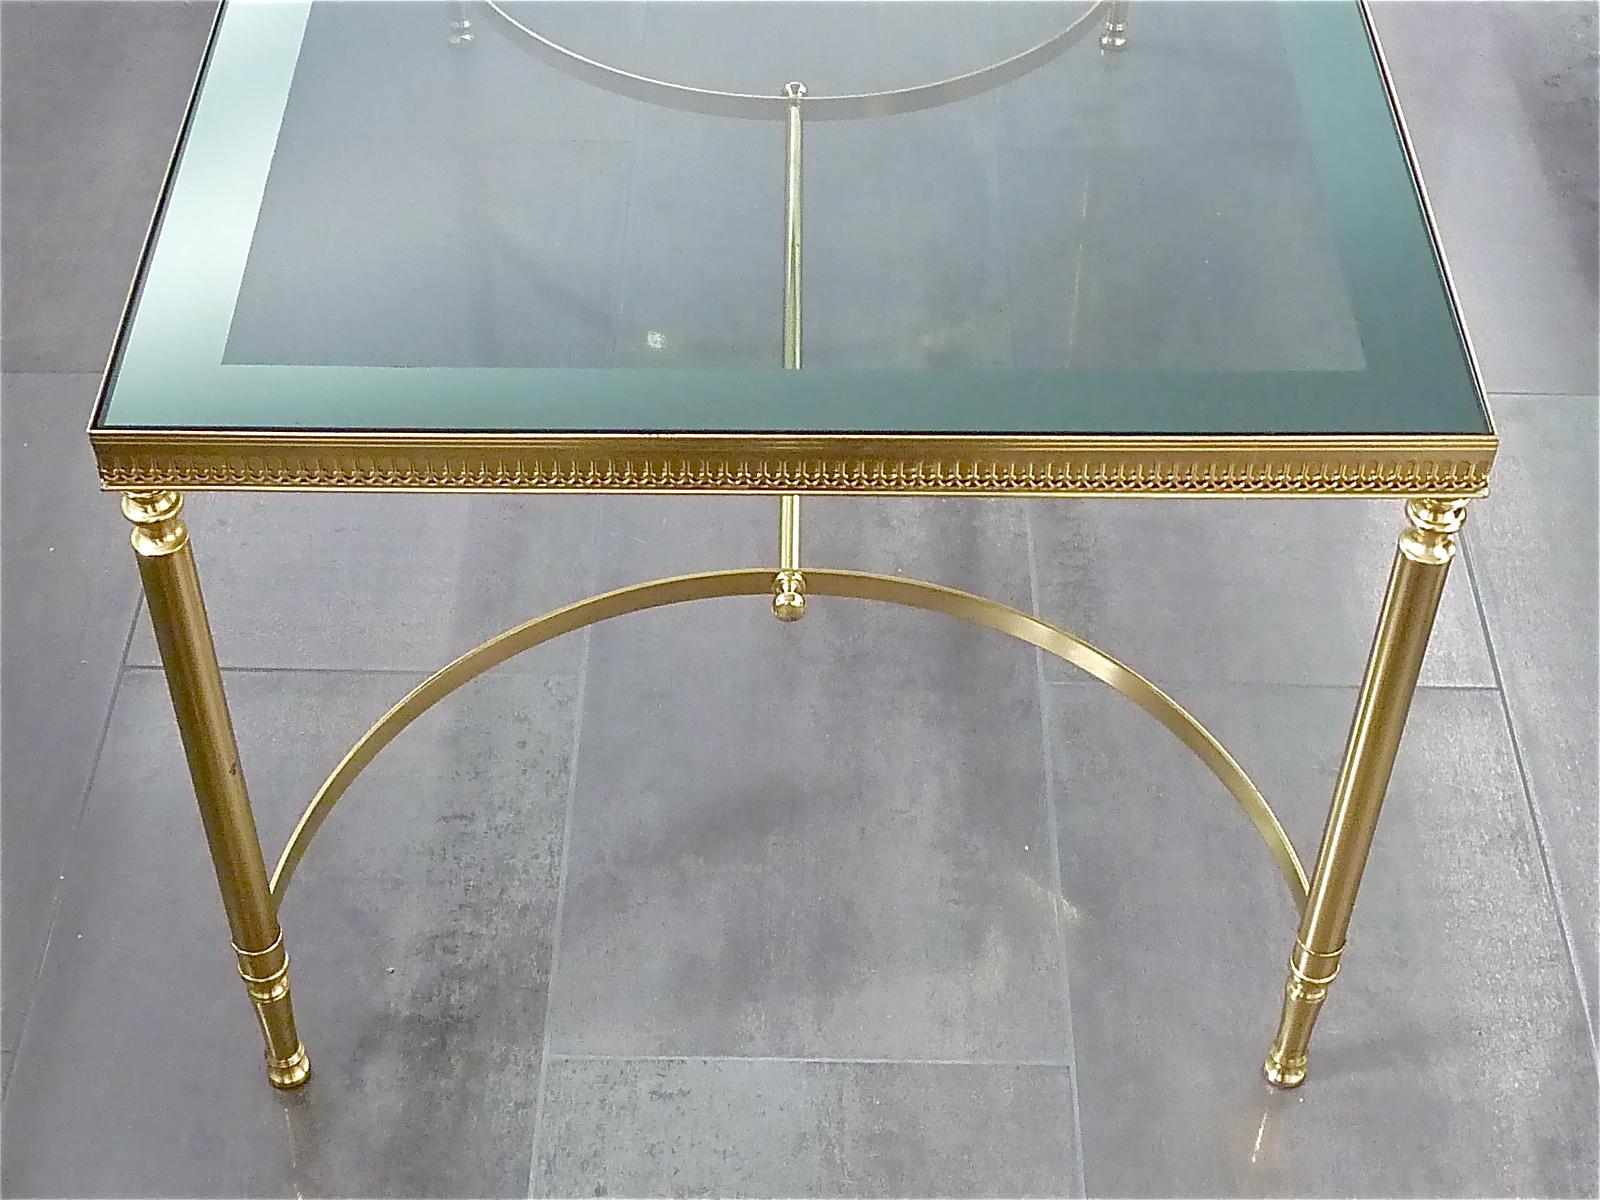 French Midcentury Maison Baguès Jansen Couch Sofa Table Brass Mirror Glass 1950s For Sale 1